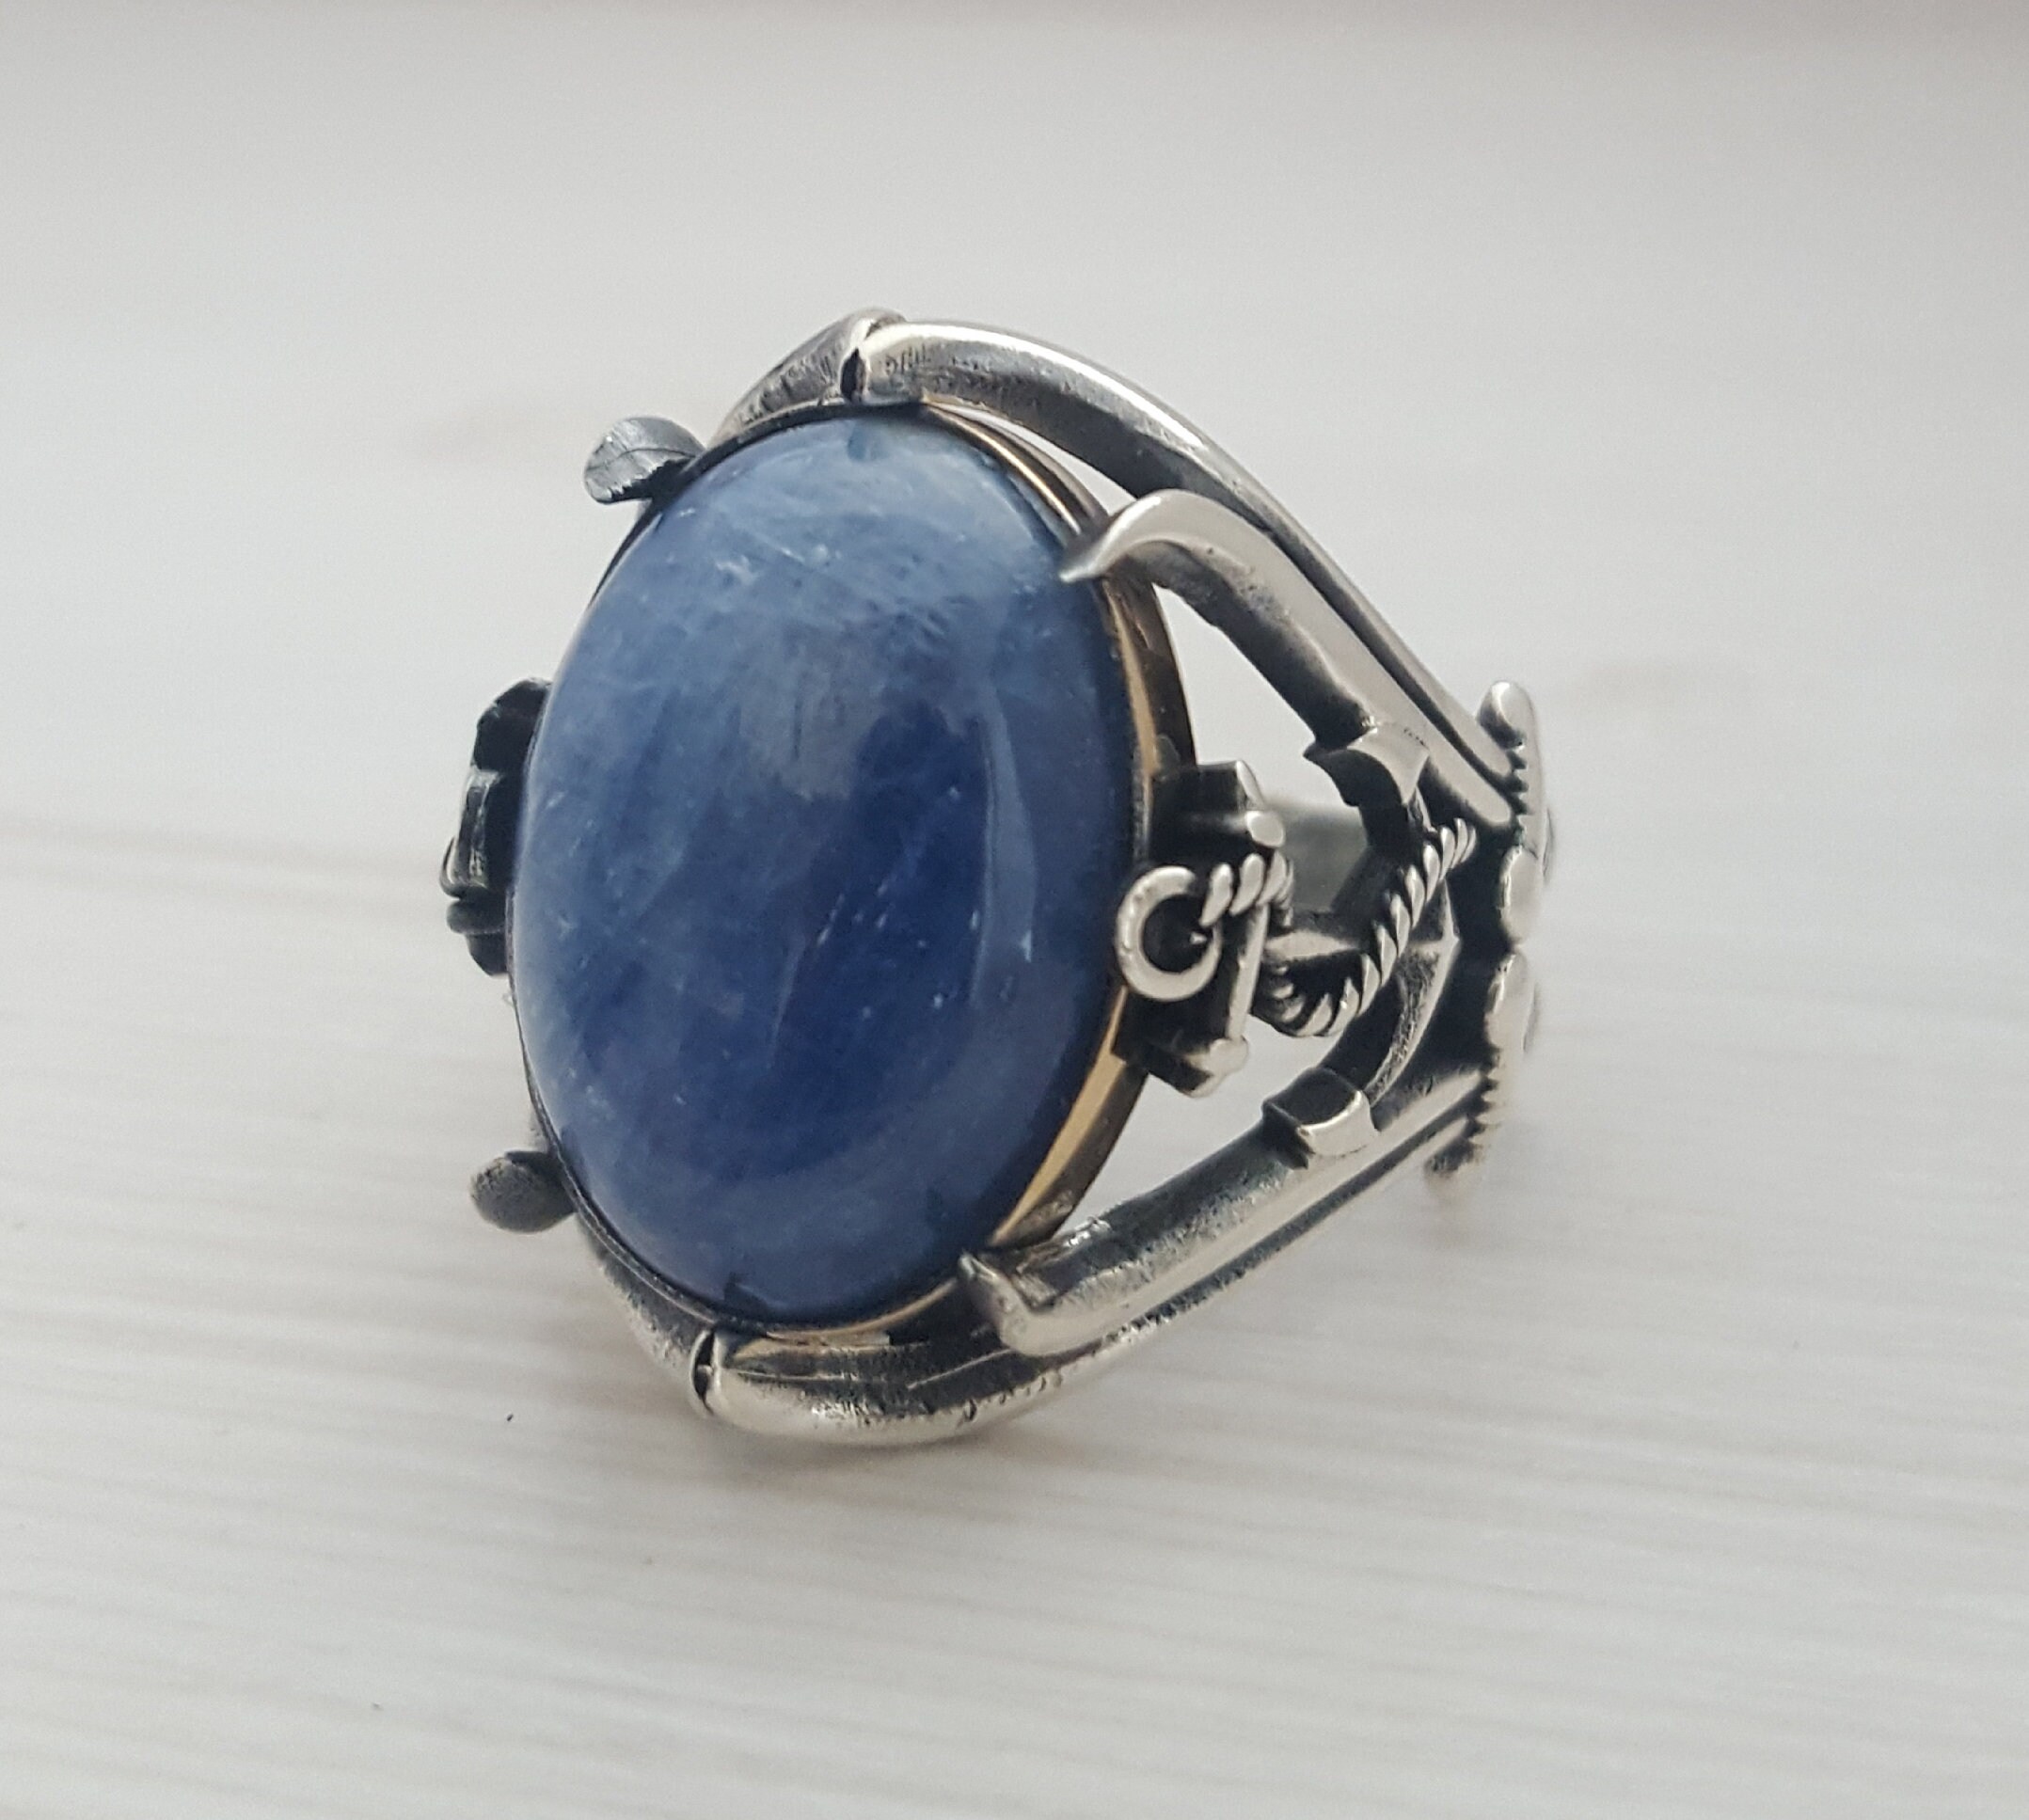 Handmade 925K Sterling Silver Mens Ring With Kyanite Stone DHL | Etsy